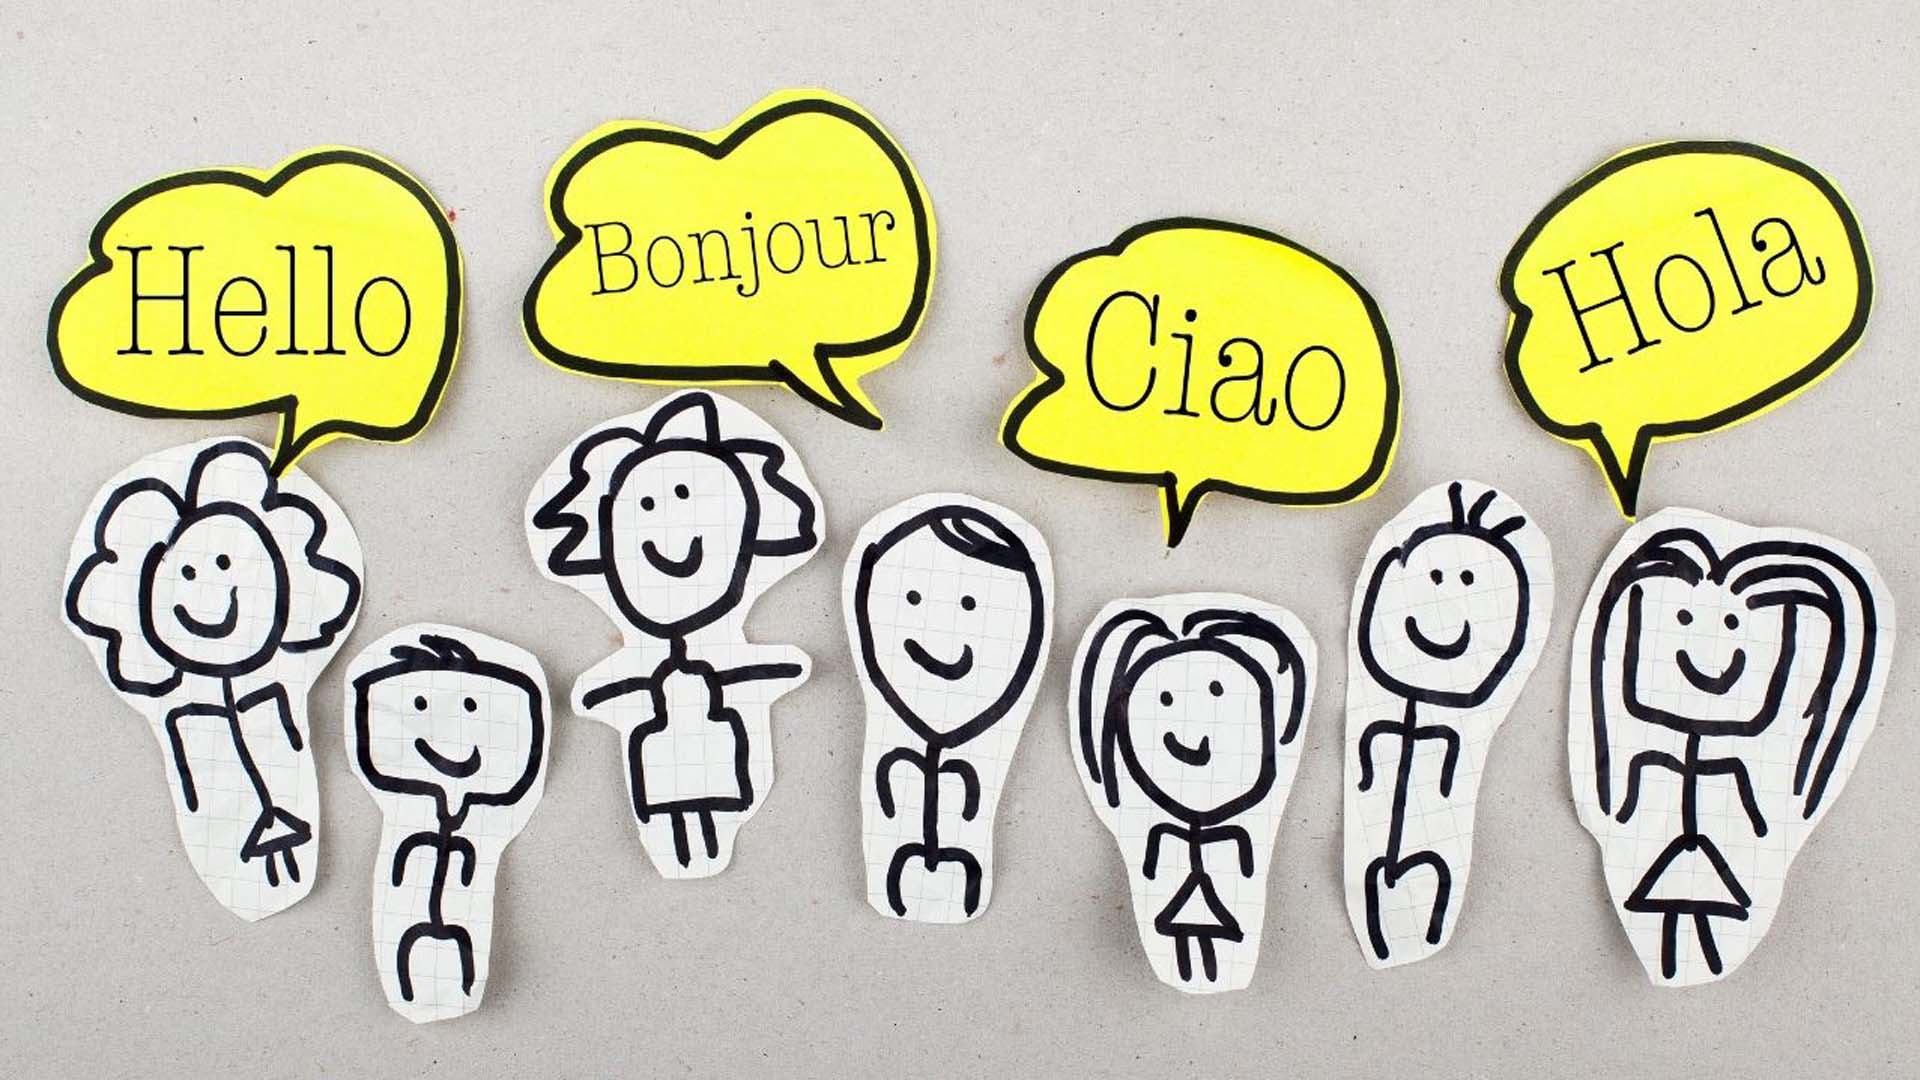 Workplace Language Barriers: Safety Is Important in any Language